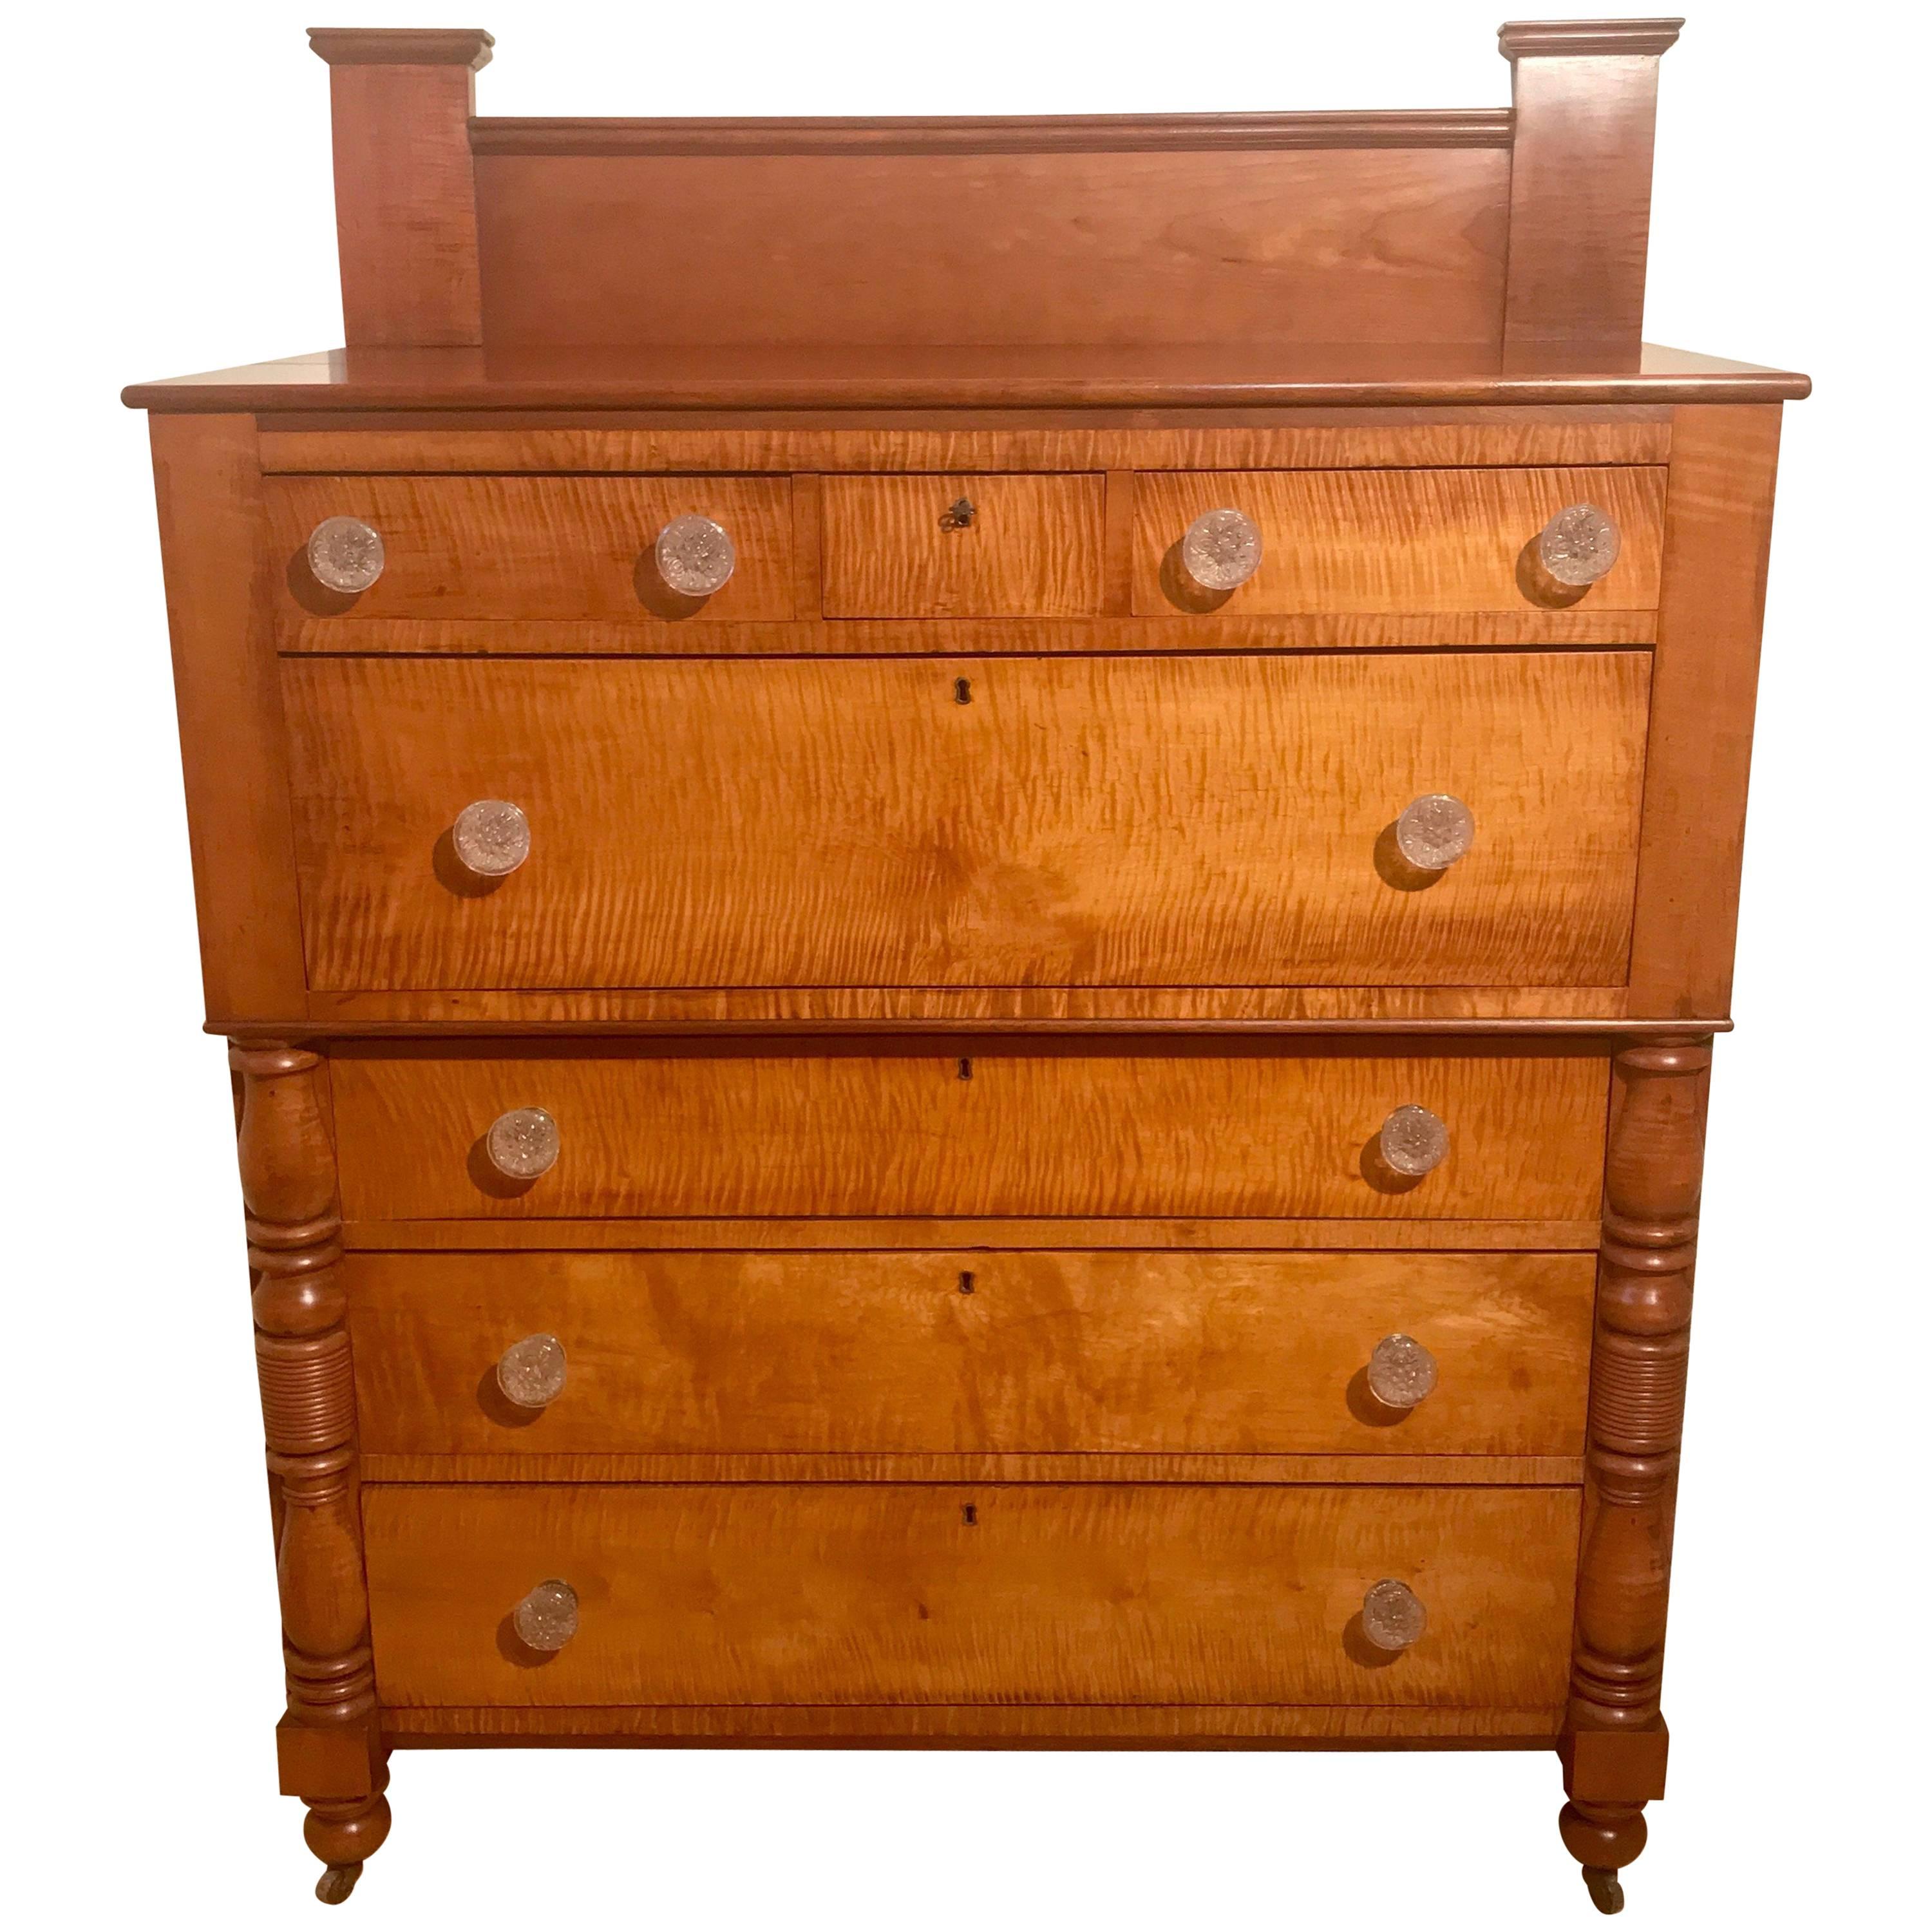 American Empire Chest of Drawers circa 1840 in Tiger Maple and Cherry For Sale